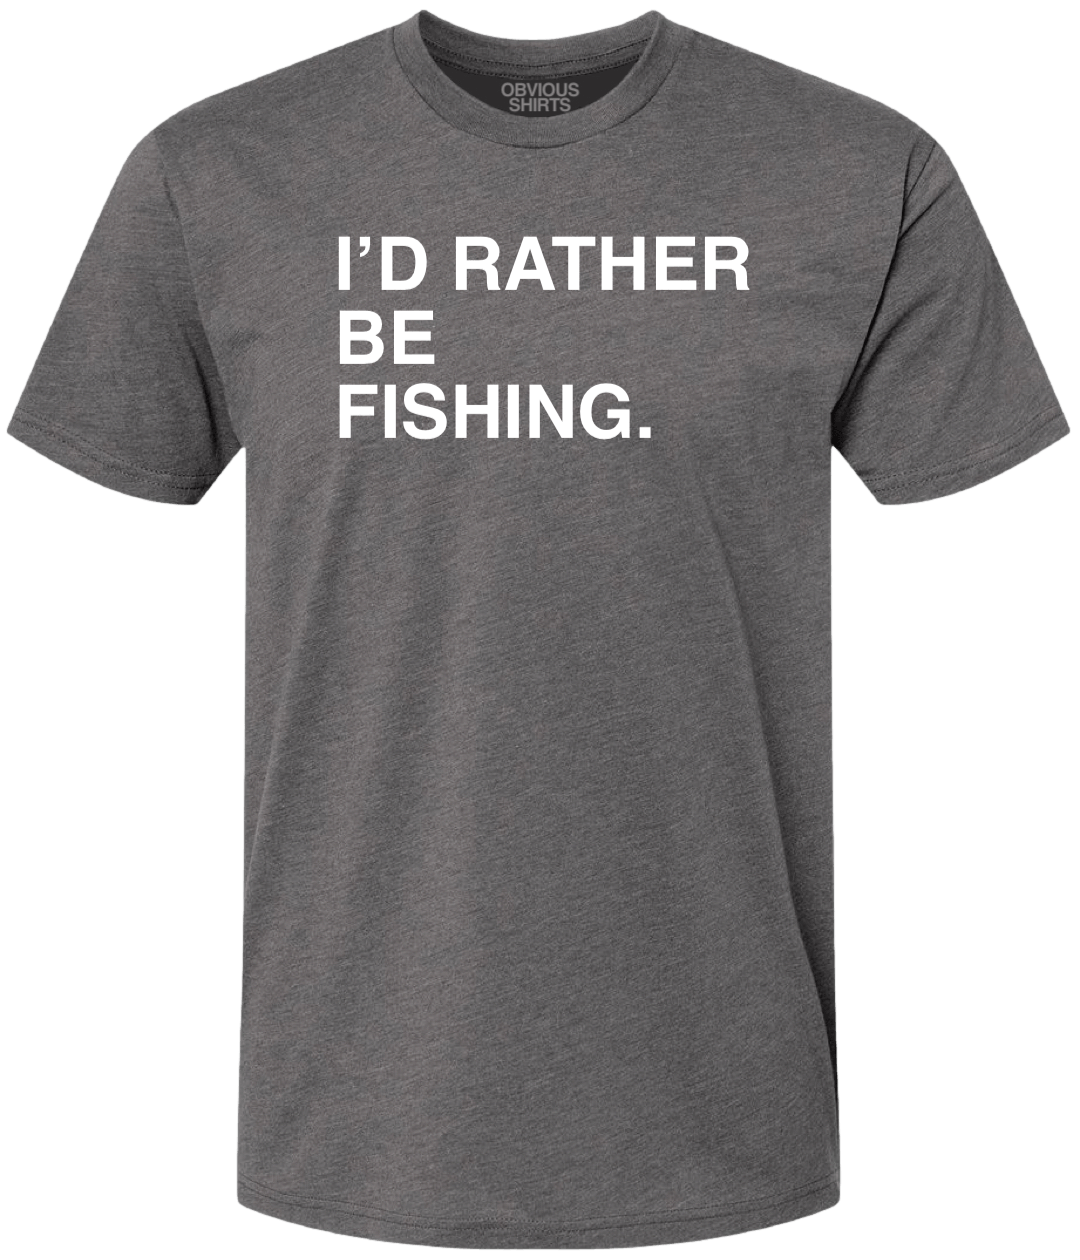 I'D RATHER BE FISHING. - OBVIOUS SHIRTS